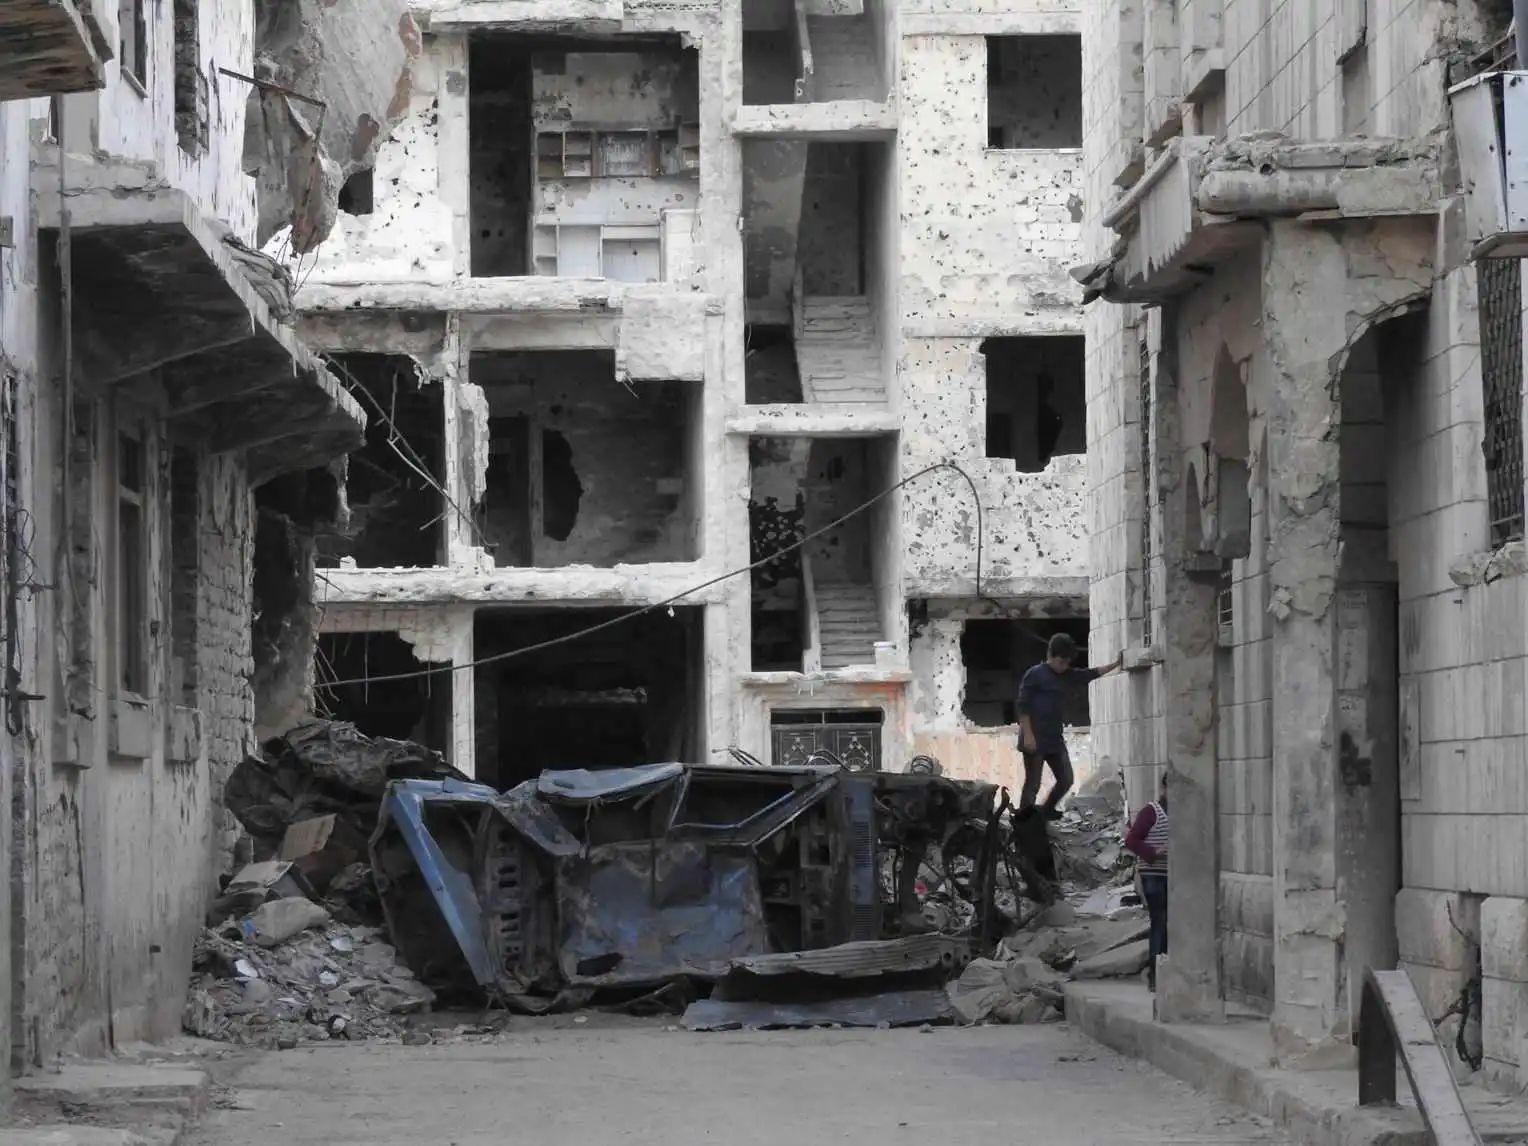 War in Syria has caused massive home destruction